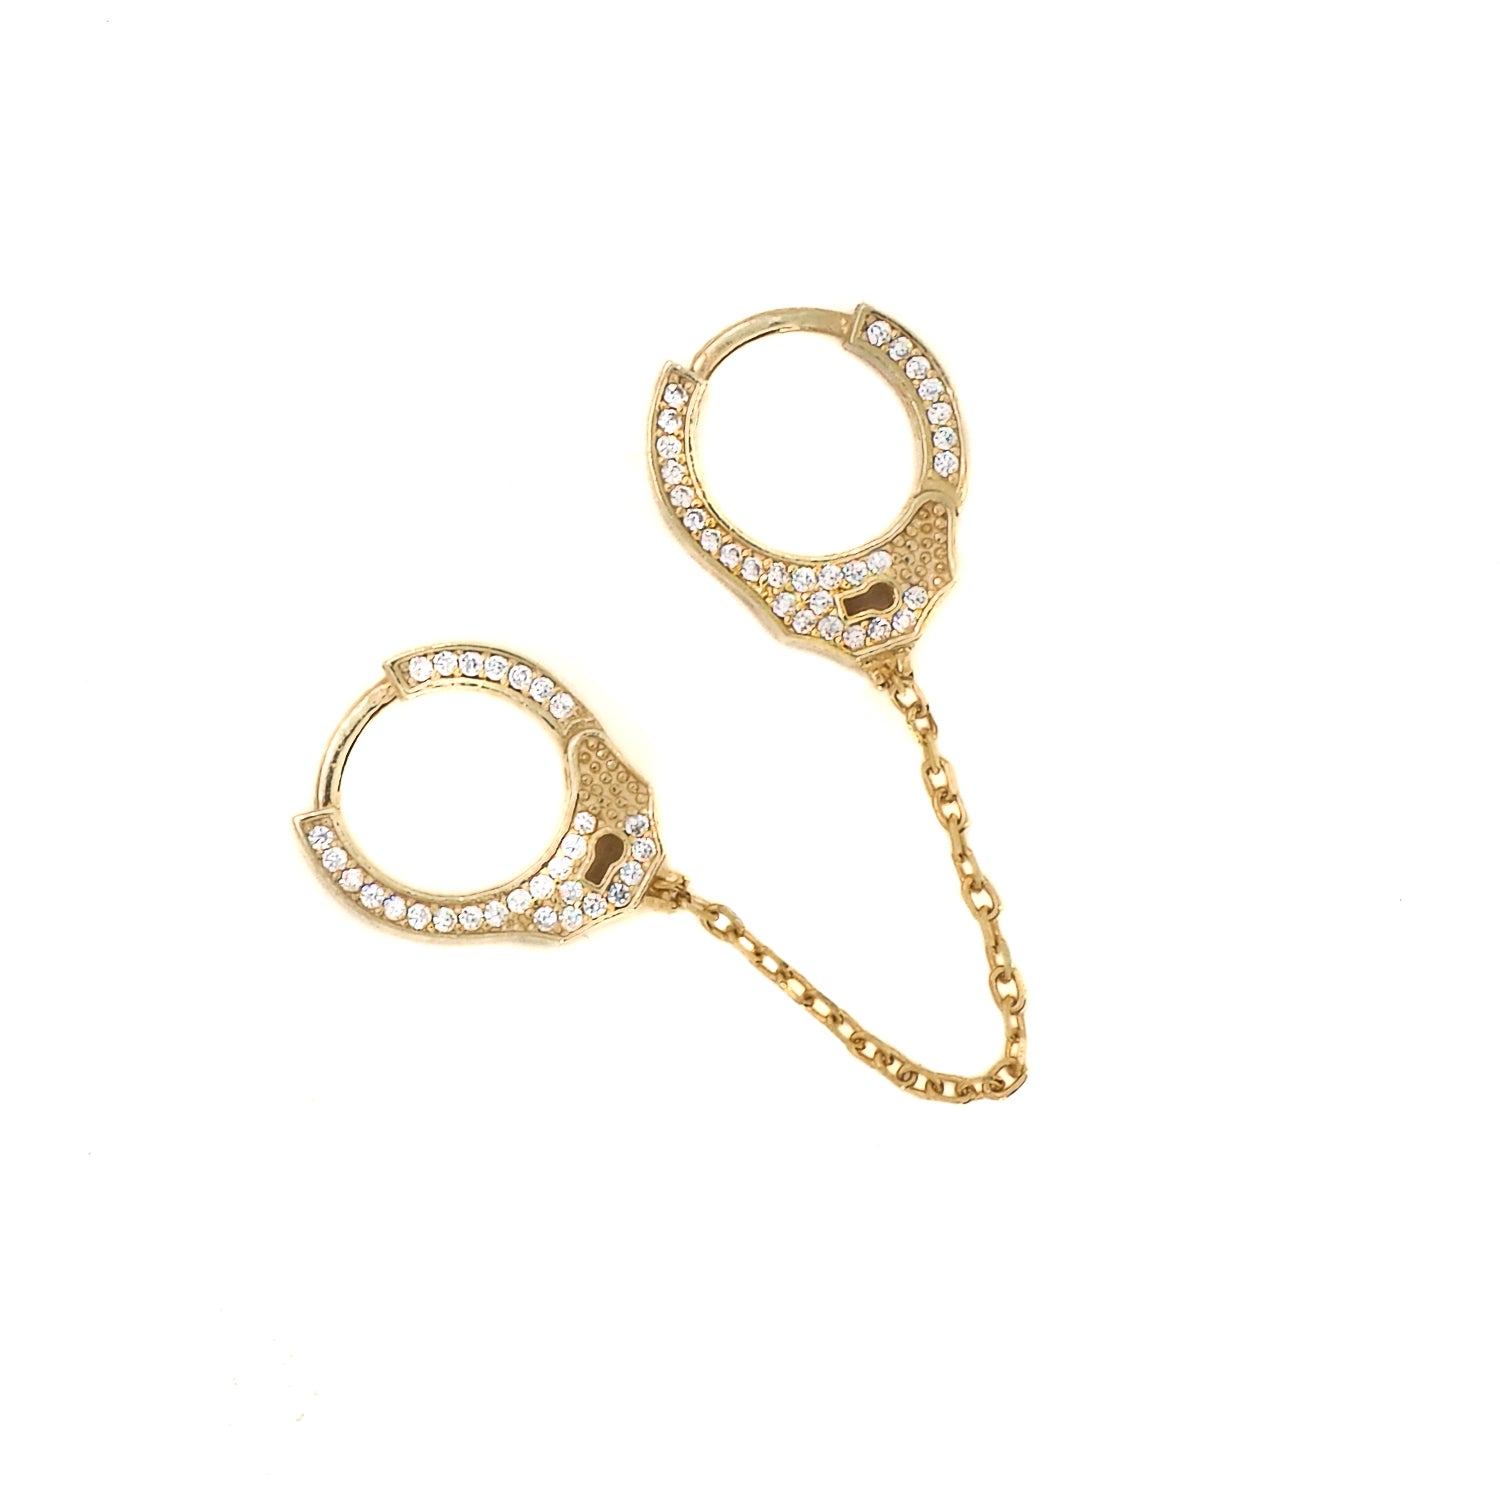 Dynamic Style: Handcrafted 18k Gold Plated Sterling Silver Earrings